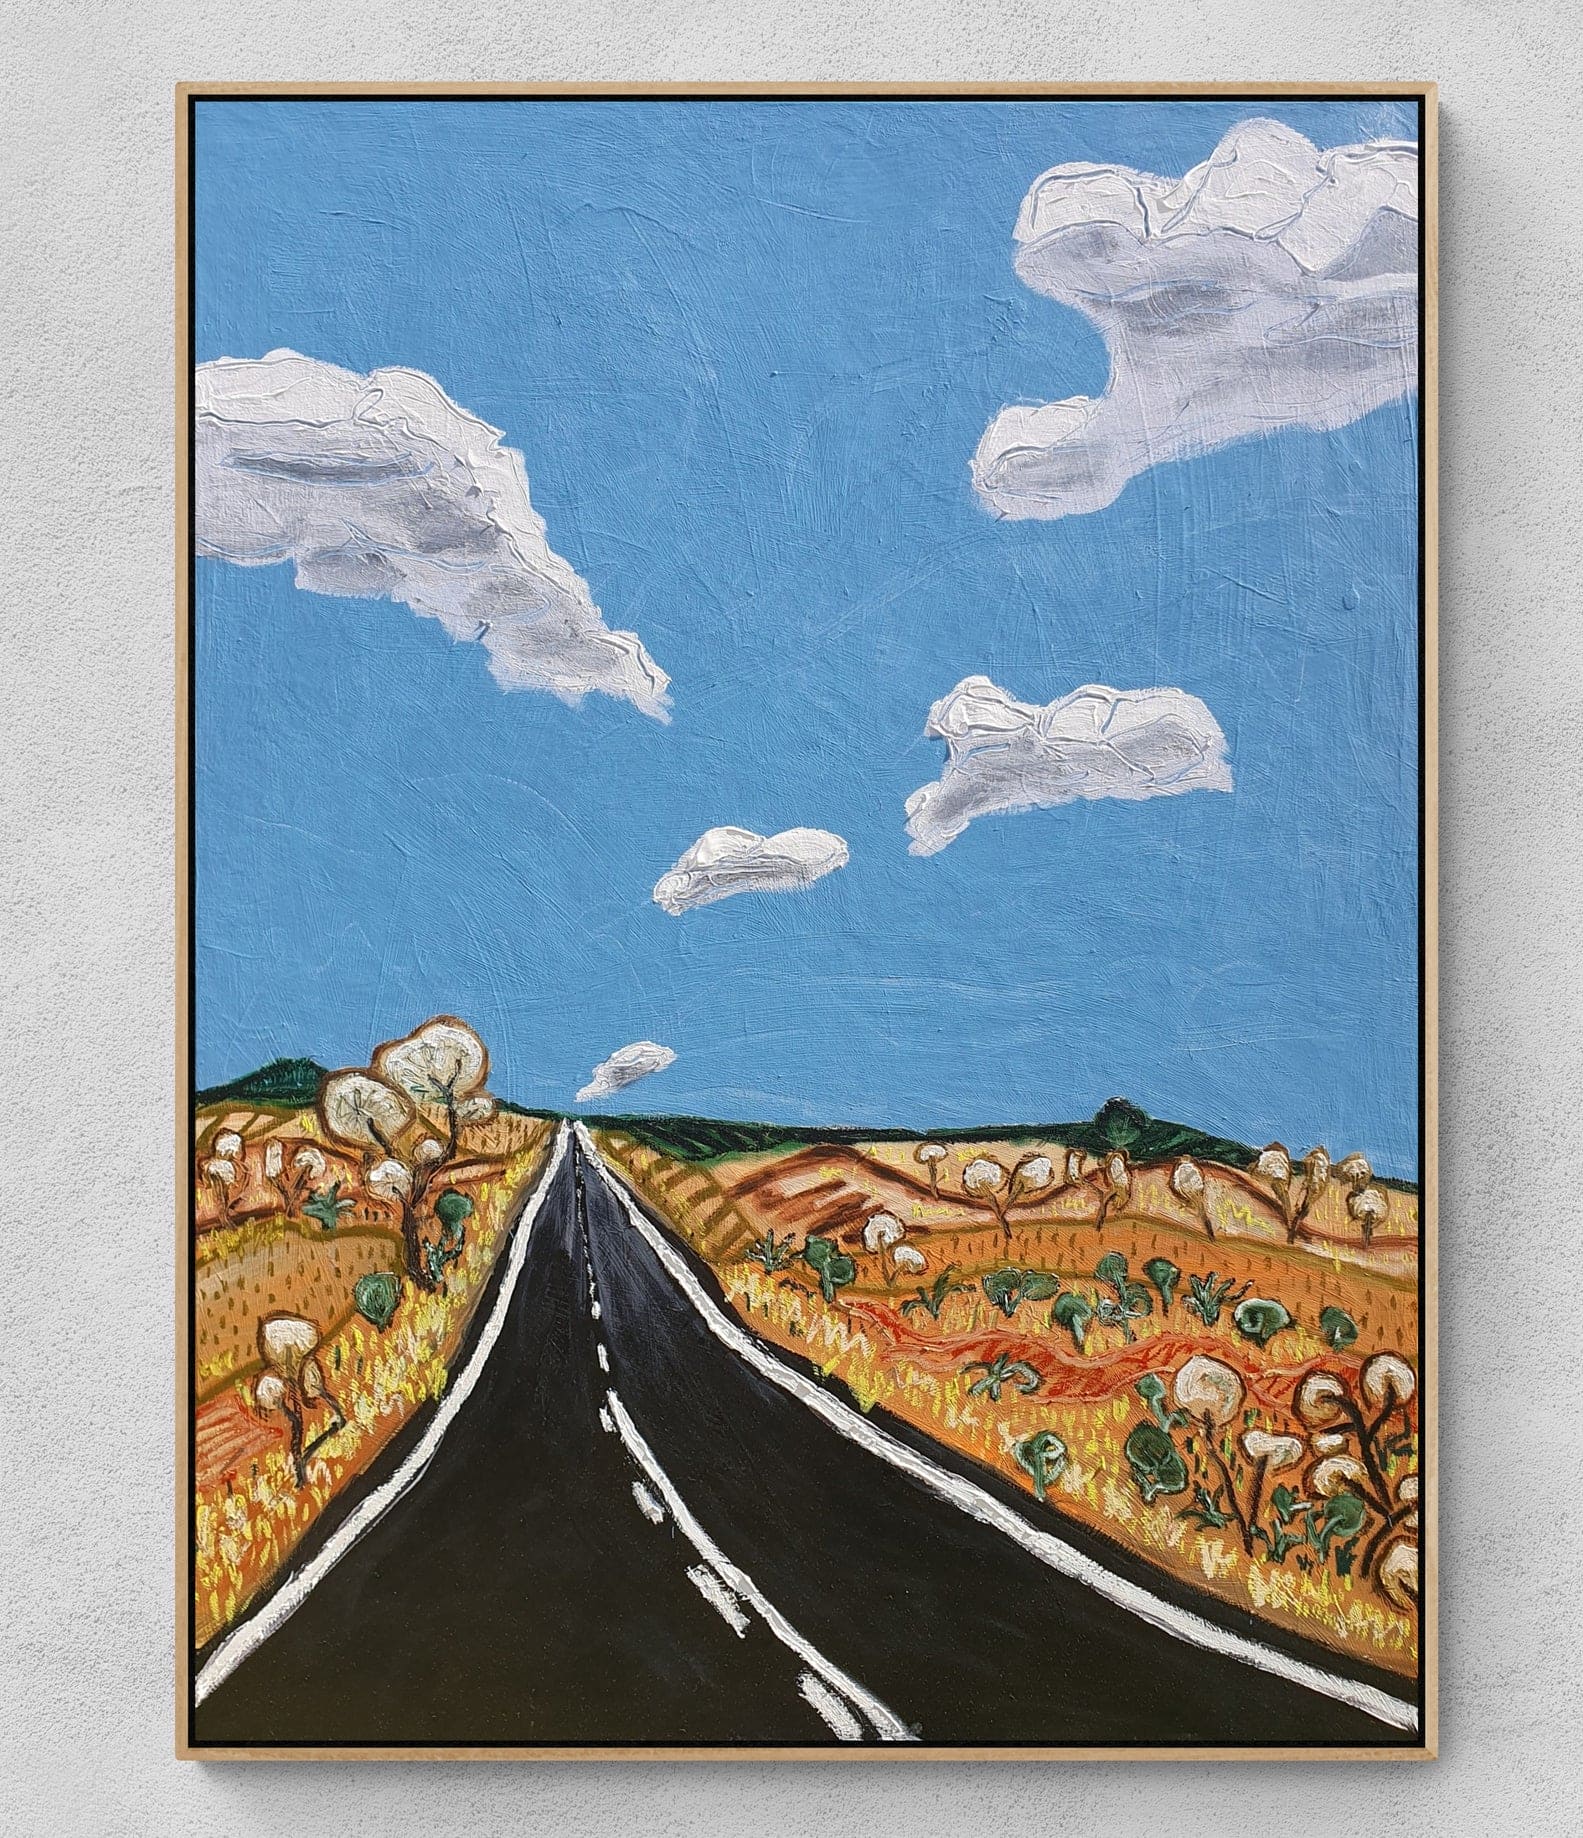 Road to Port Campbell- Sam Patterson-Smith